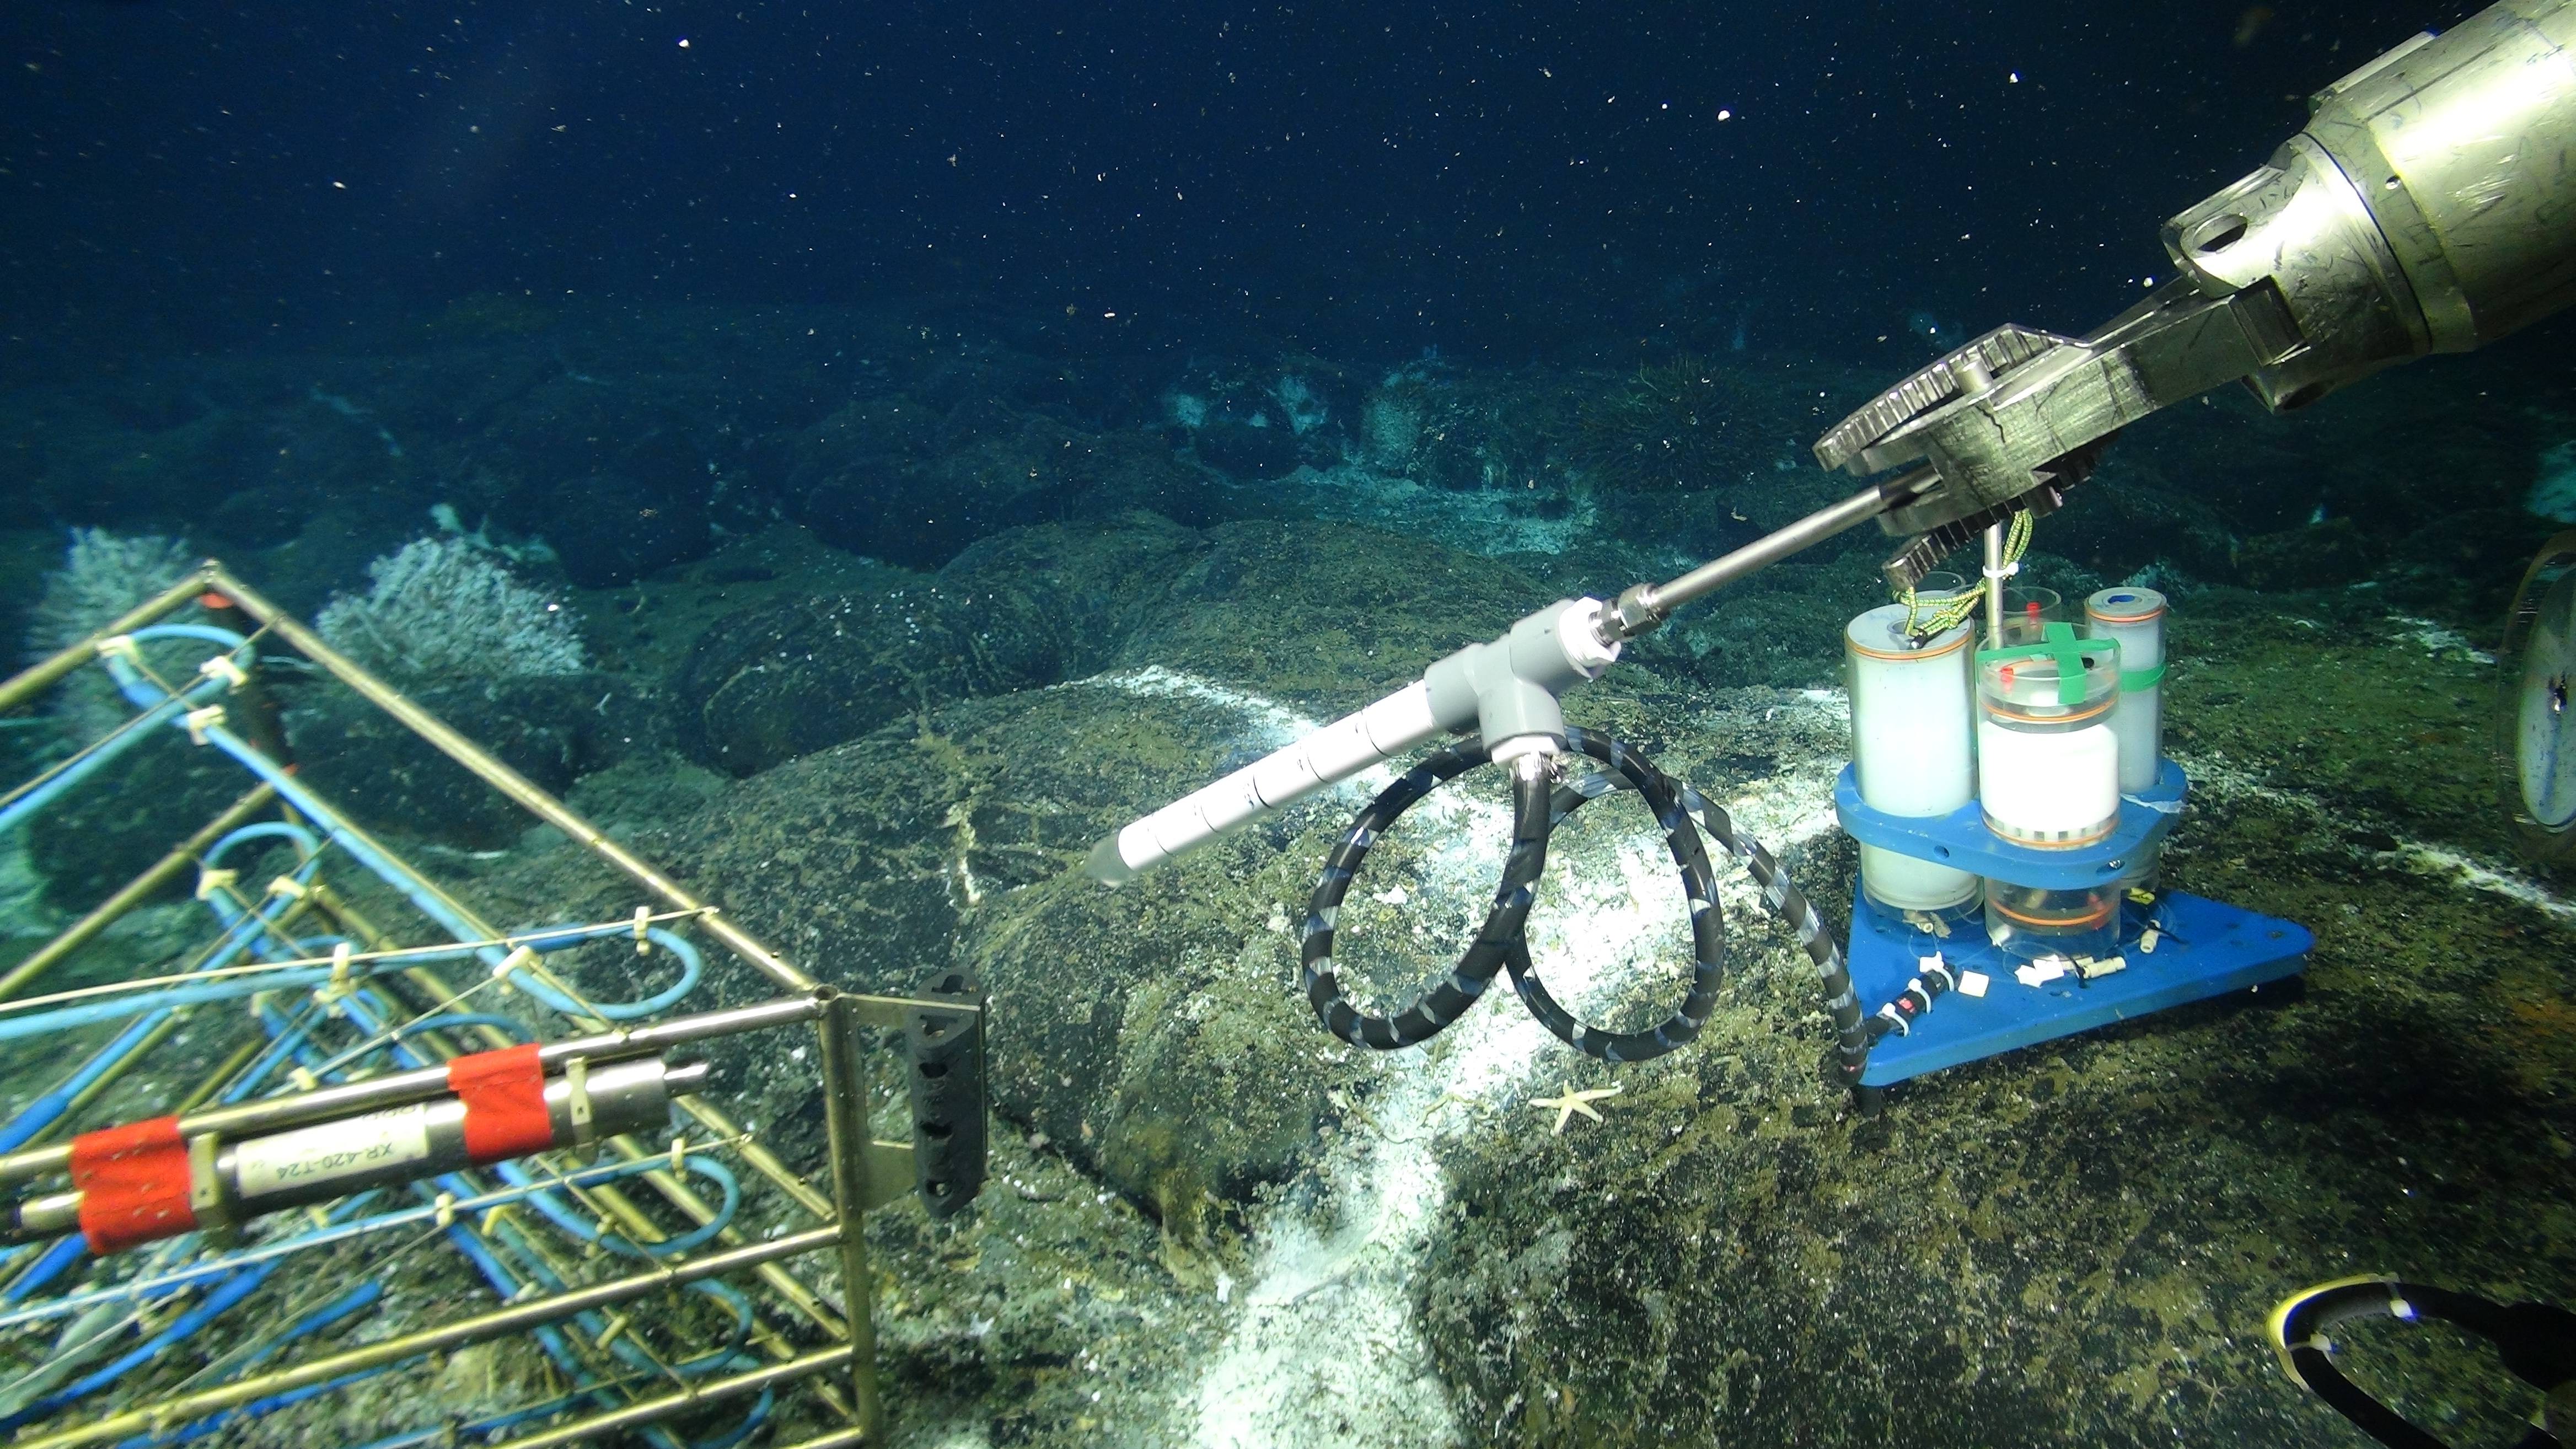 A new osmotic fluid sampler being installed in a diffuse flow site hosting a 3D temperature array in the ASHES Hydrothermal Field on the summit of Axial Seamount. Onshore analyses of the entrapped fluids provide insights on the evolution of fluid chemistry in time, in response to changing environmental conditions e.g. earthquakes, temperature, microbial utilization of gases and different elements. Credit: UW/NSF-OOI/WHOI; V16.